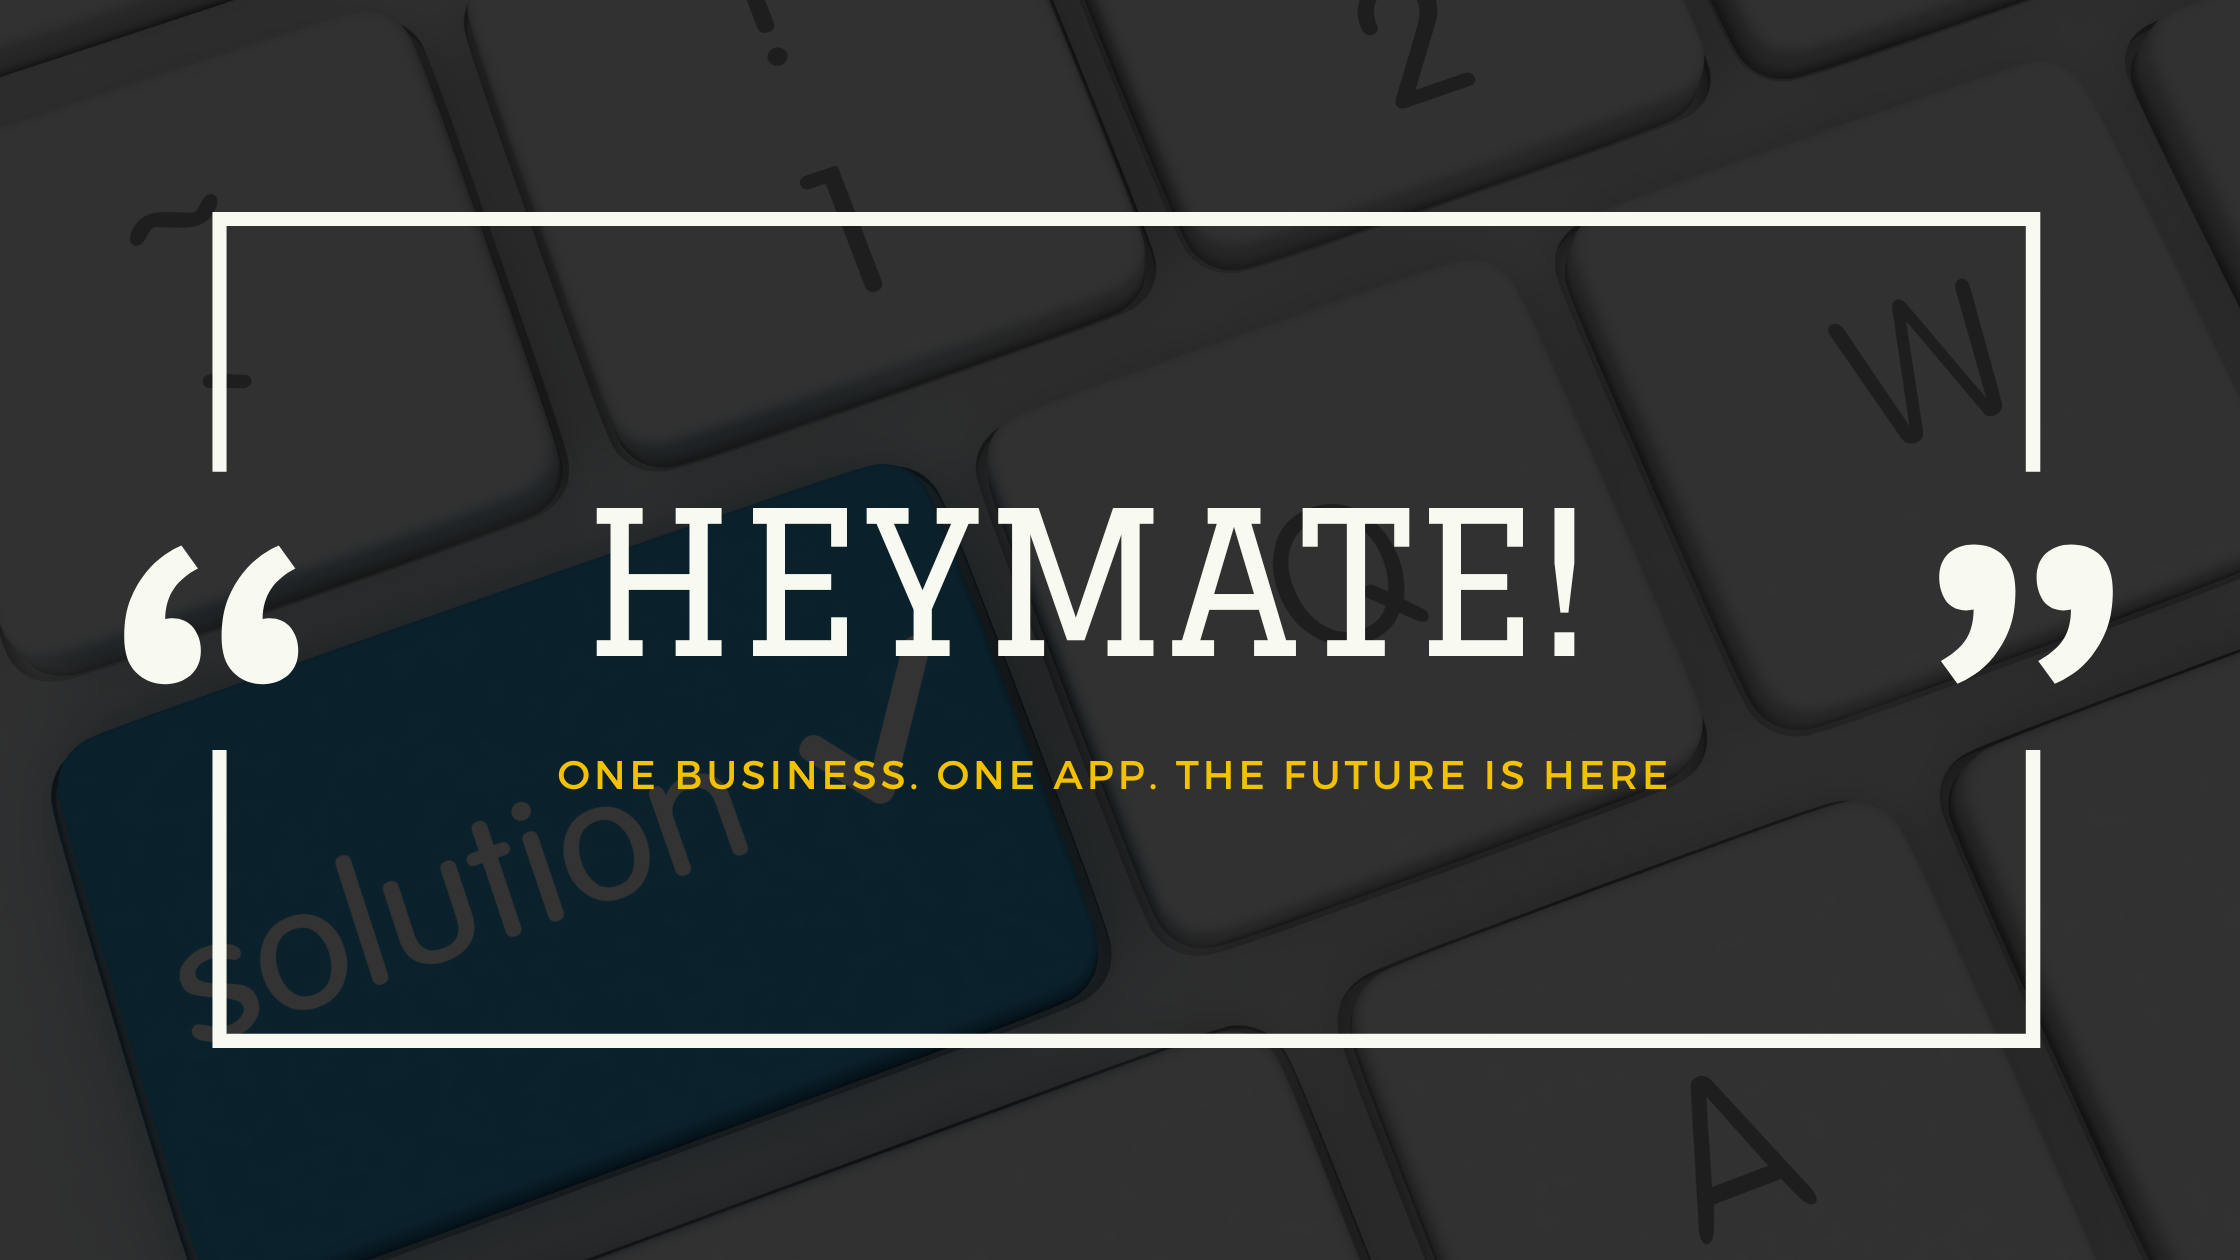 What is heymate?